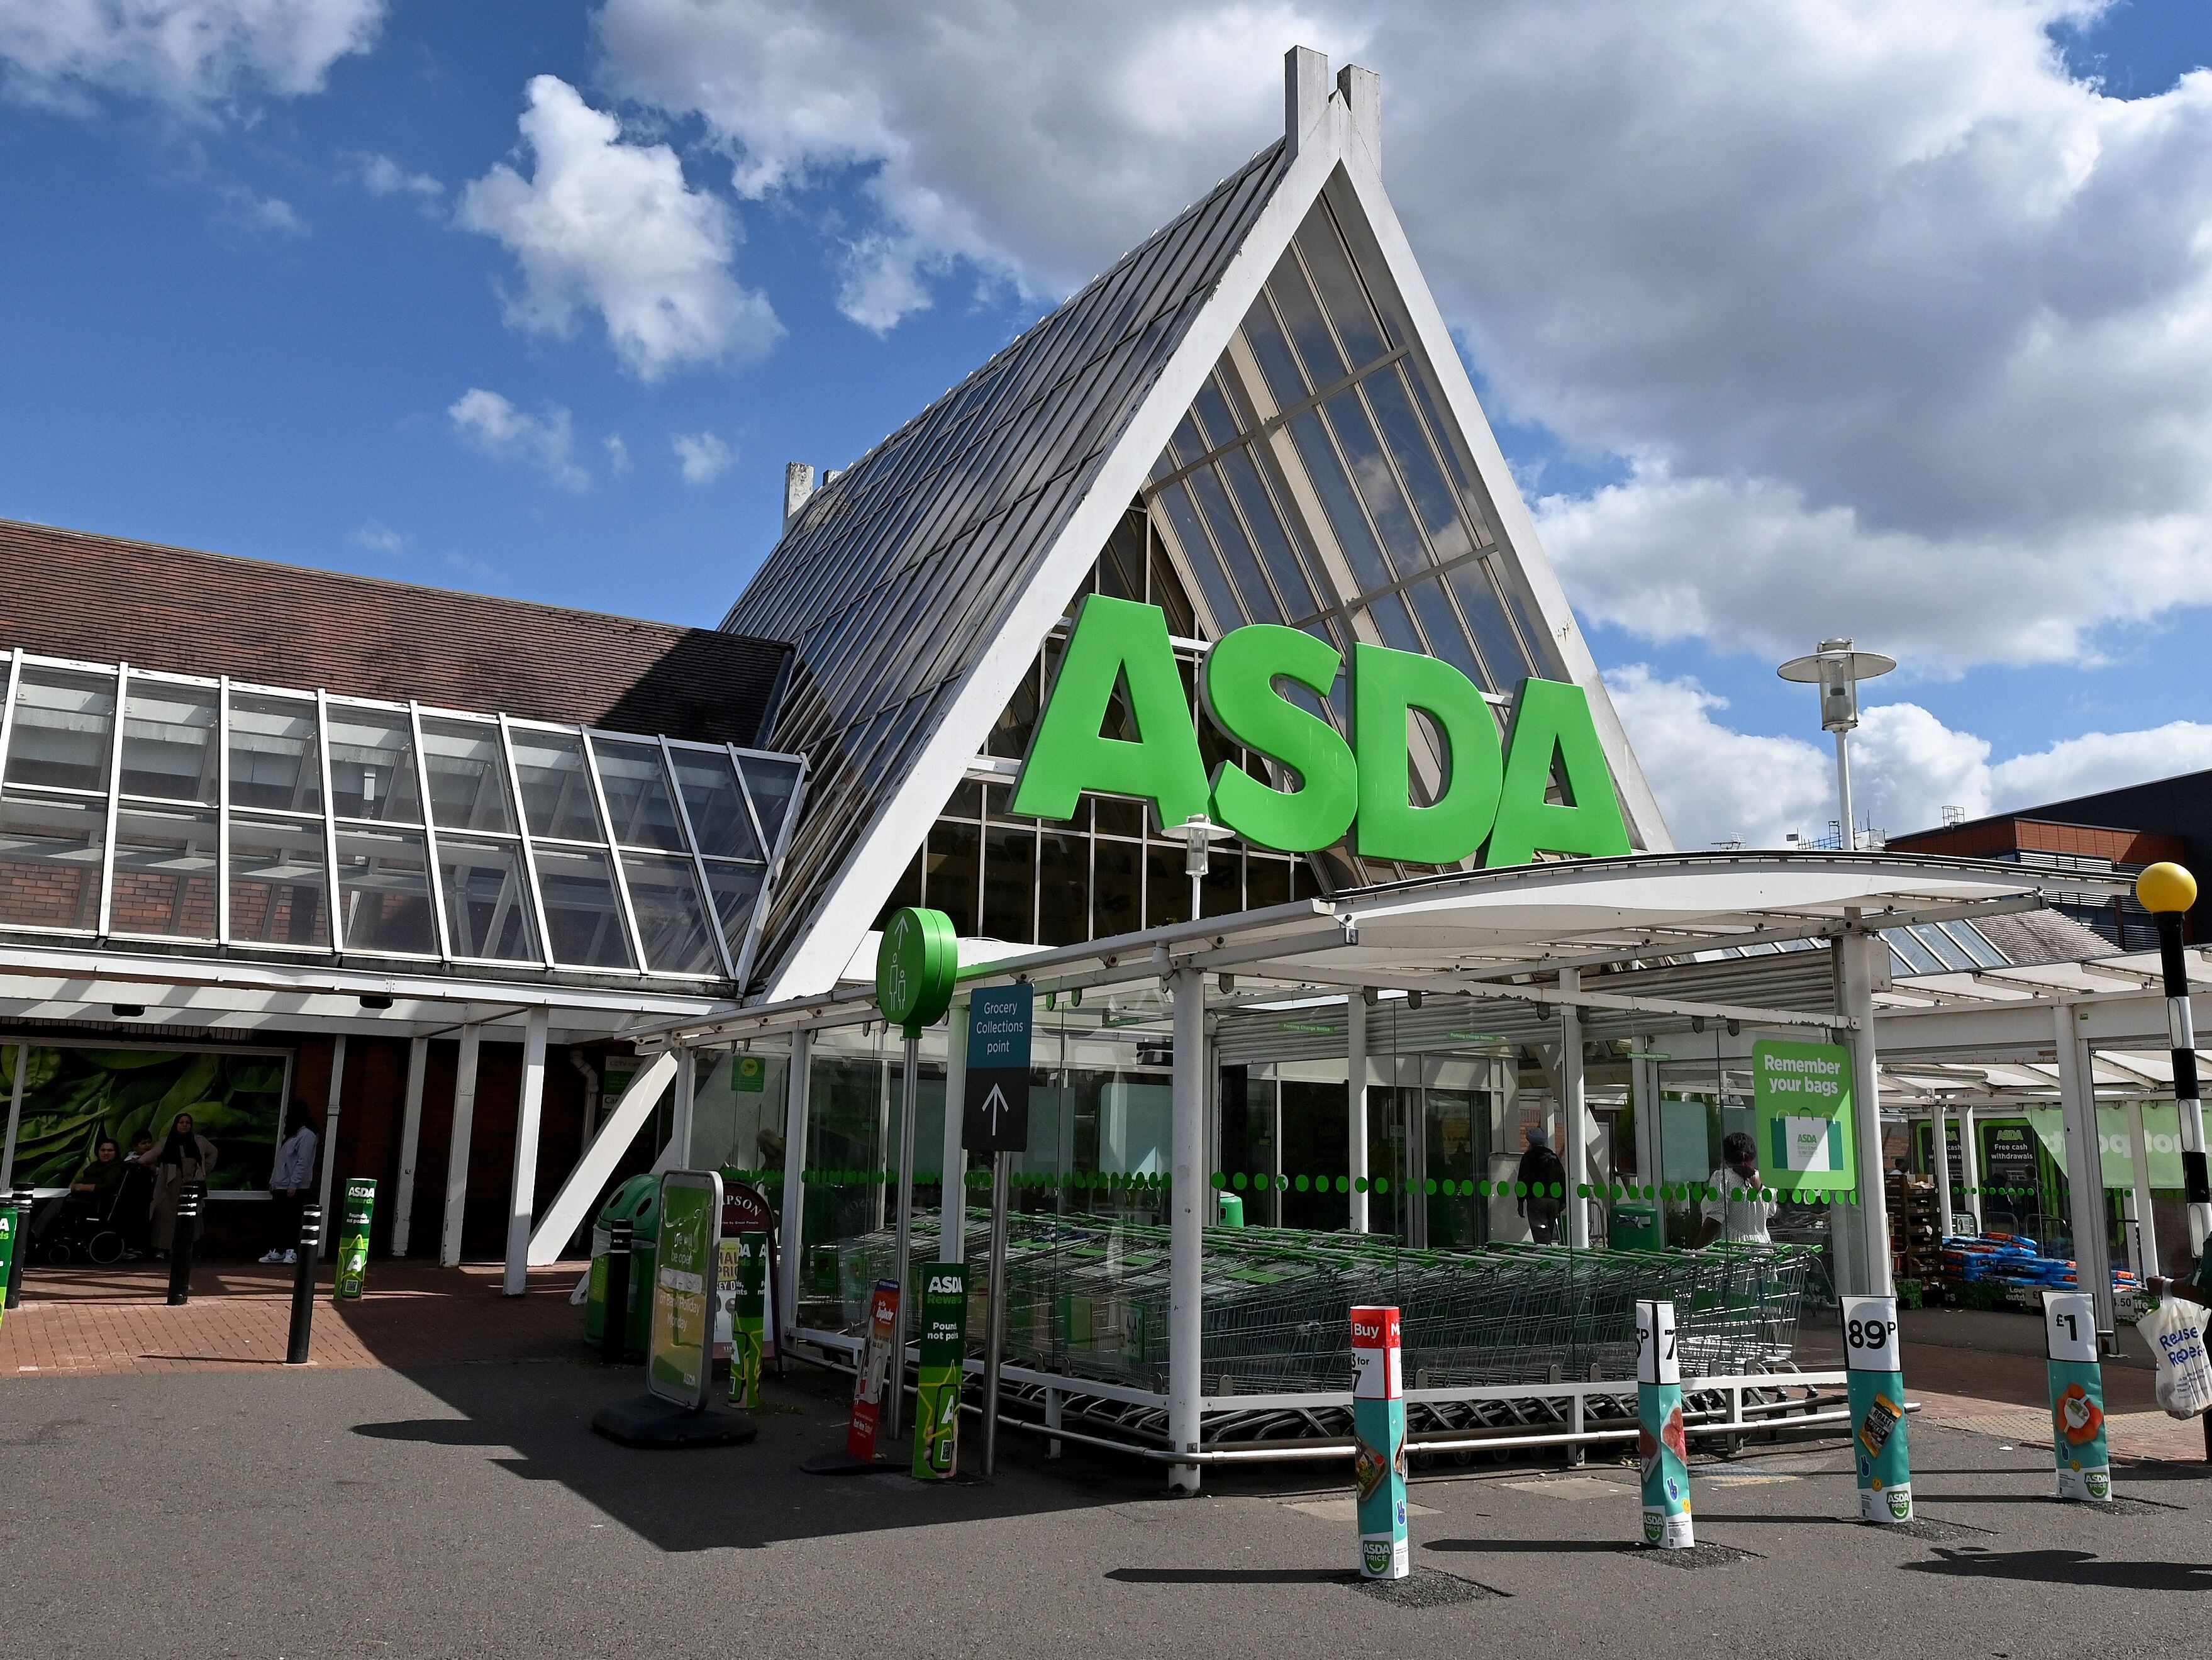 Jailed: Man who lay down in Wolverhampton Asda store entrance is sent to prison